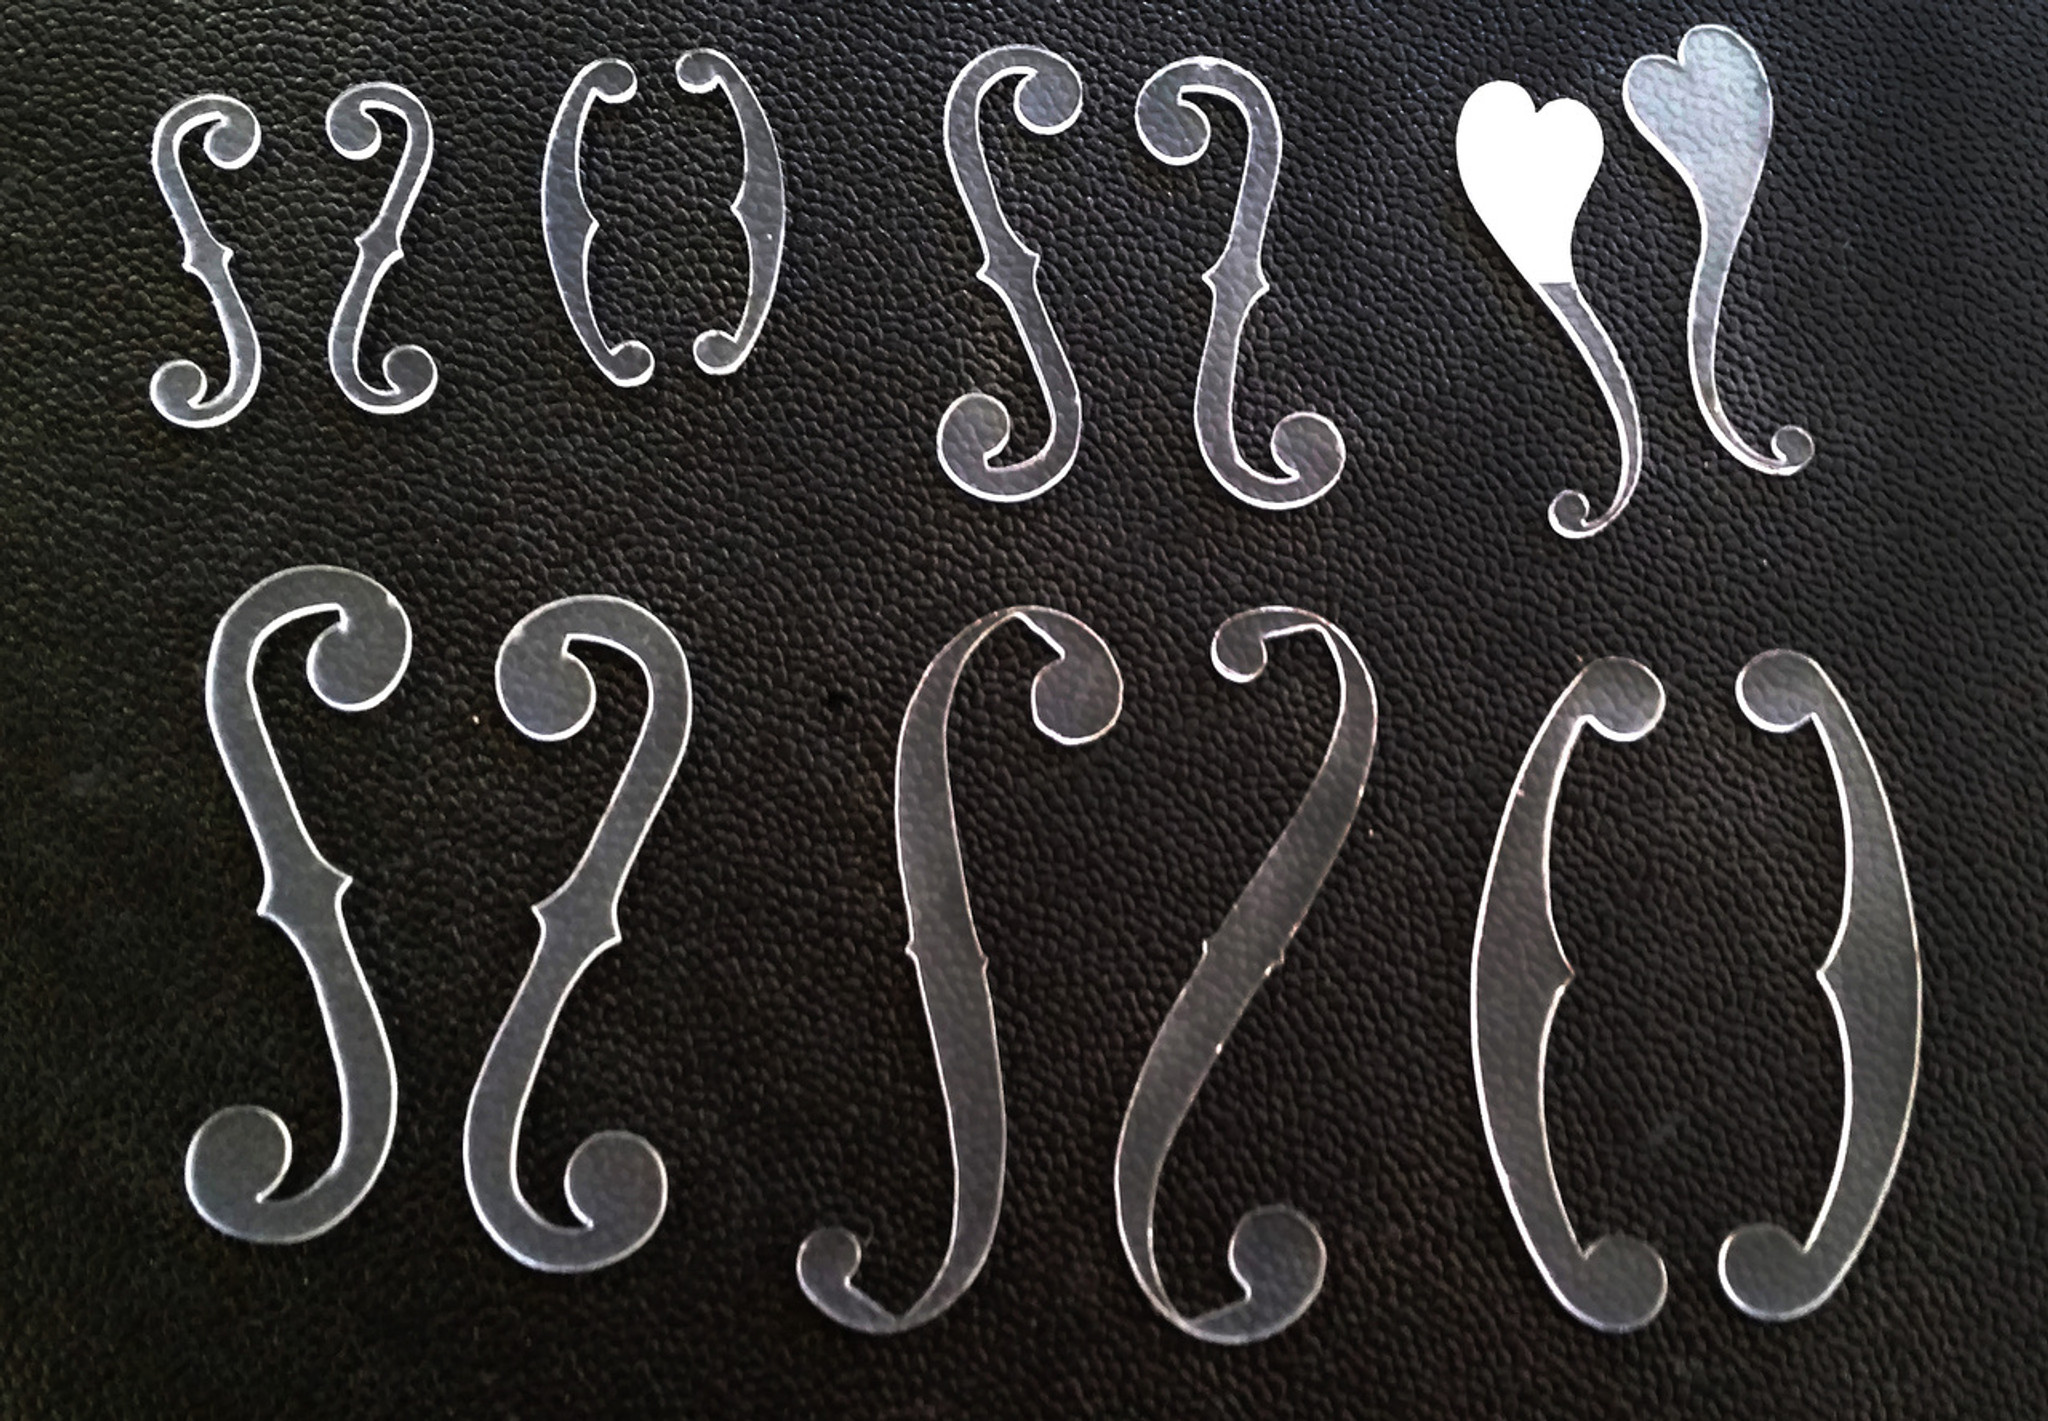 14pc. set of Fhole Stencil Cutouts use as decorative elements or